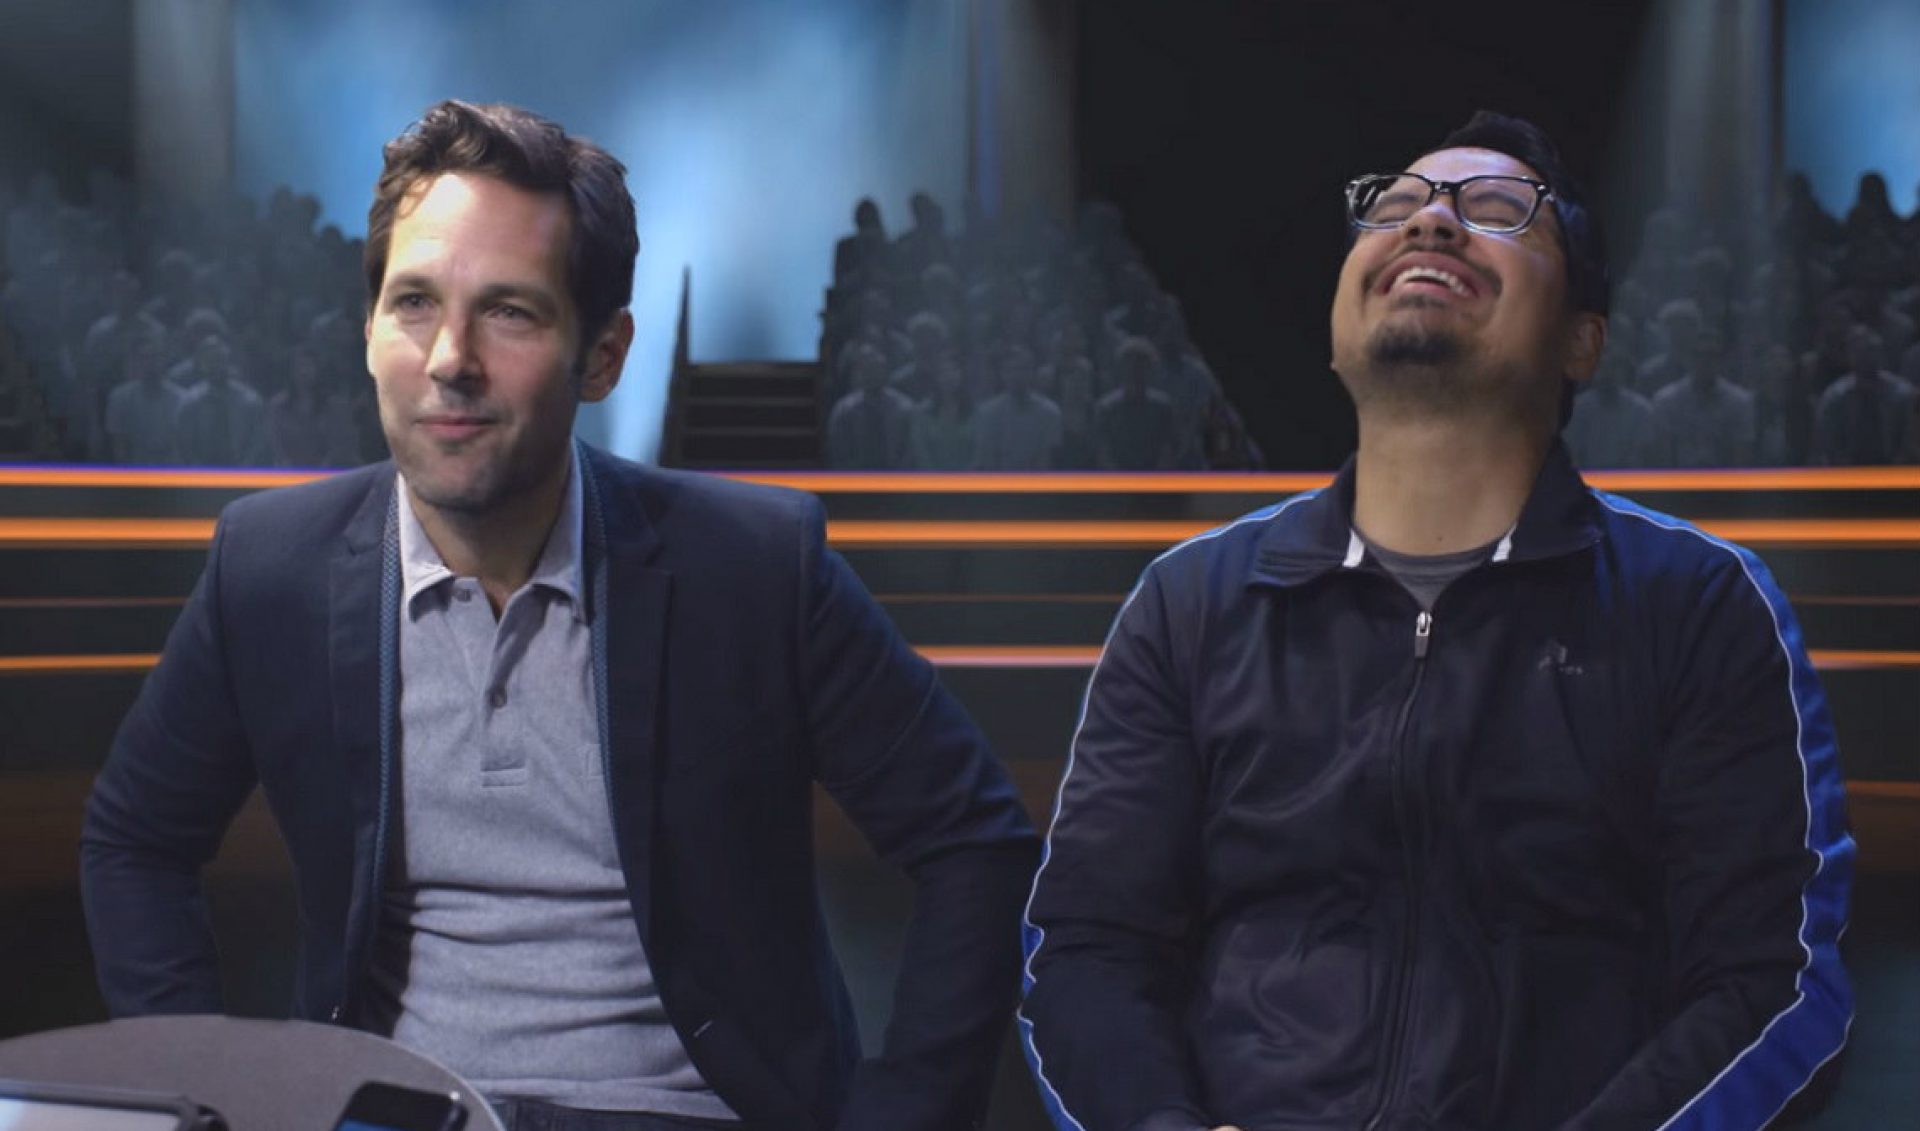 Paul Rudd Partners With VSauce3, CollegeHumor For More ‘Ant-Man’ Promos